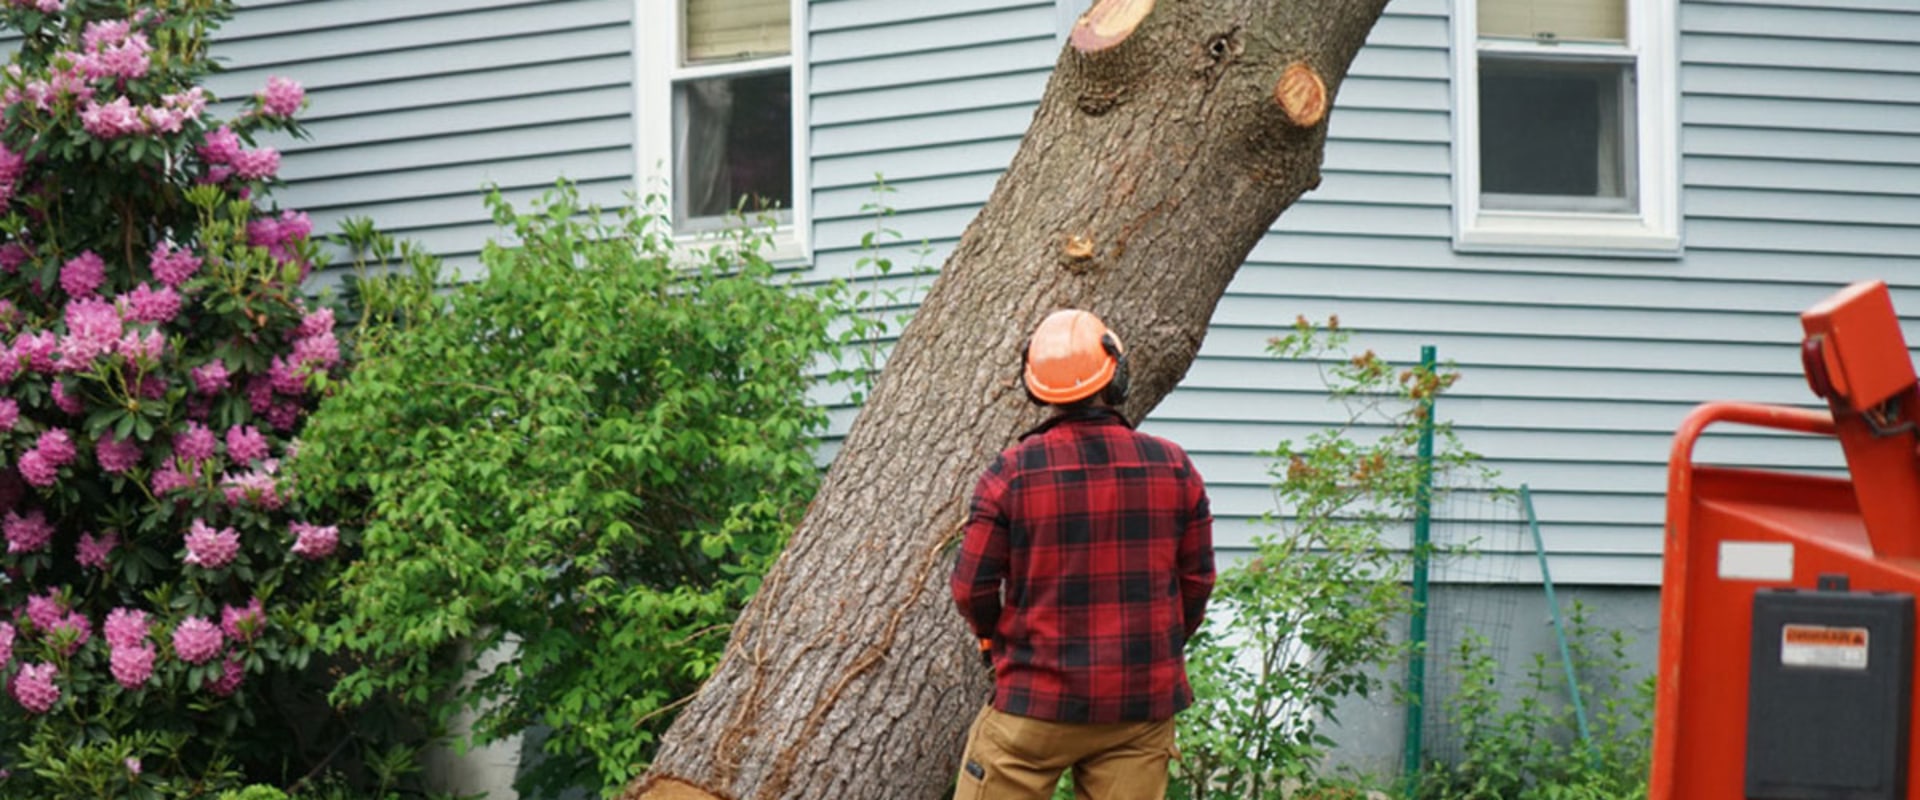 How much do tree surgeons make in america?